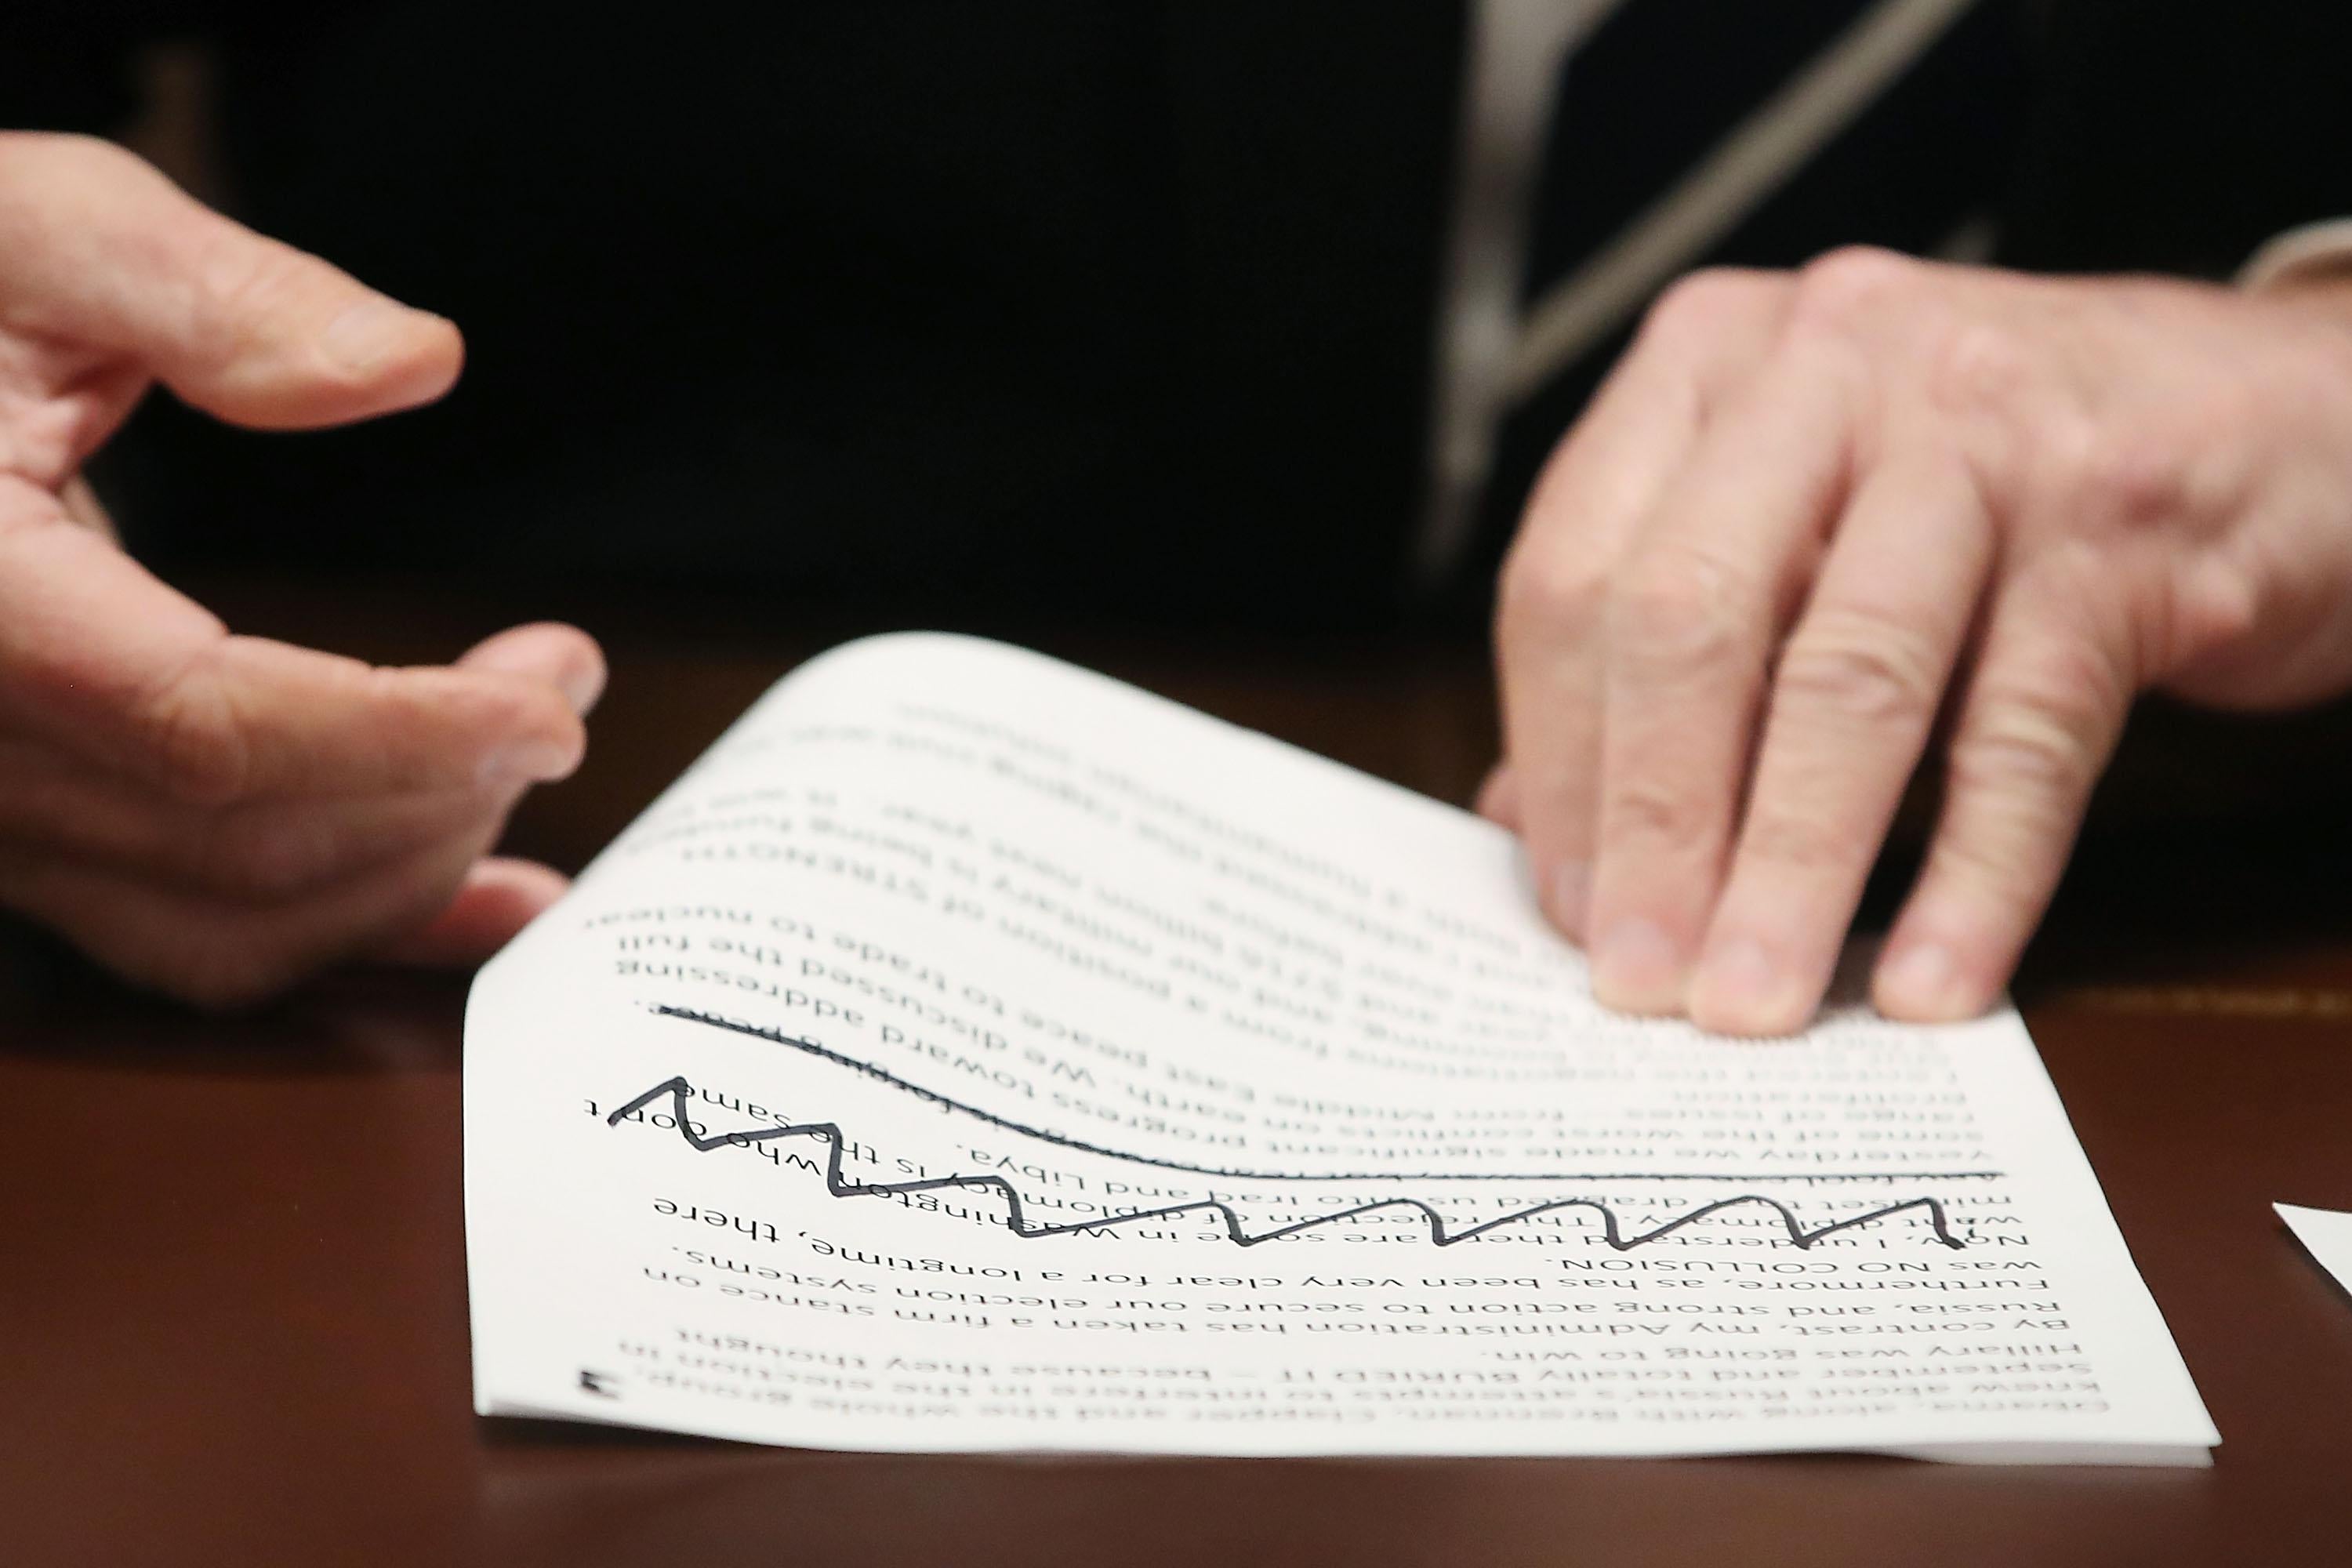 Trump’s hands hold typed notes with Sharpie'd scribbles on them.